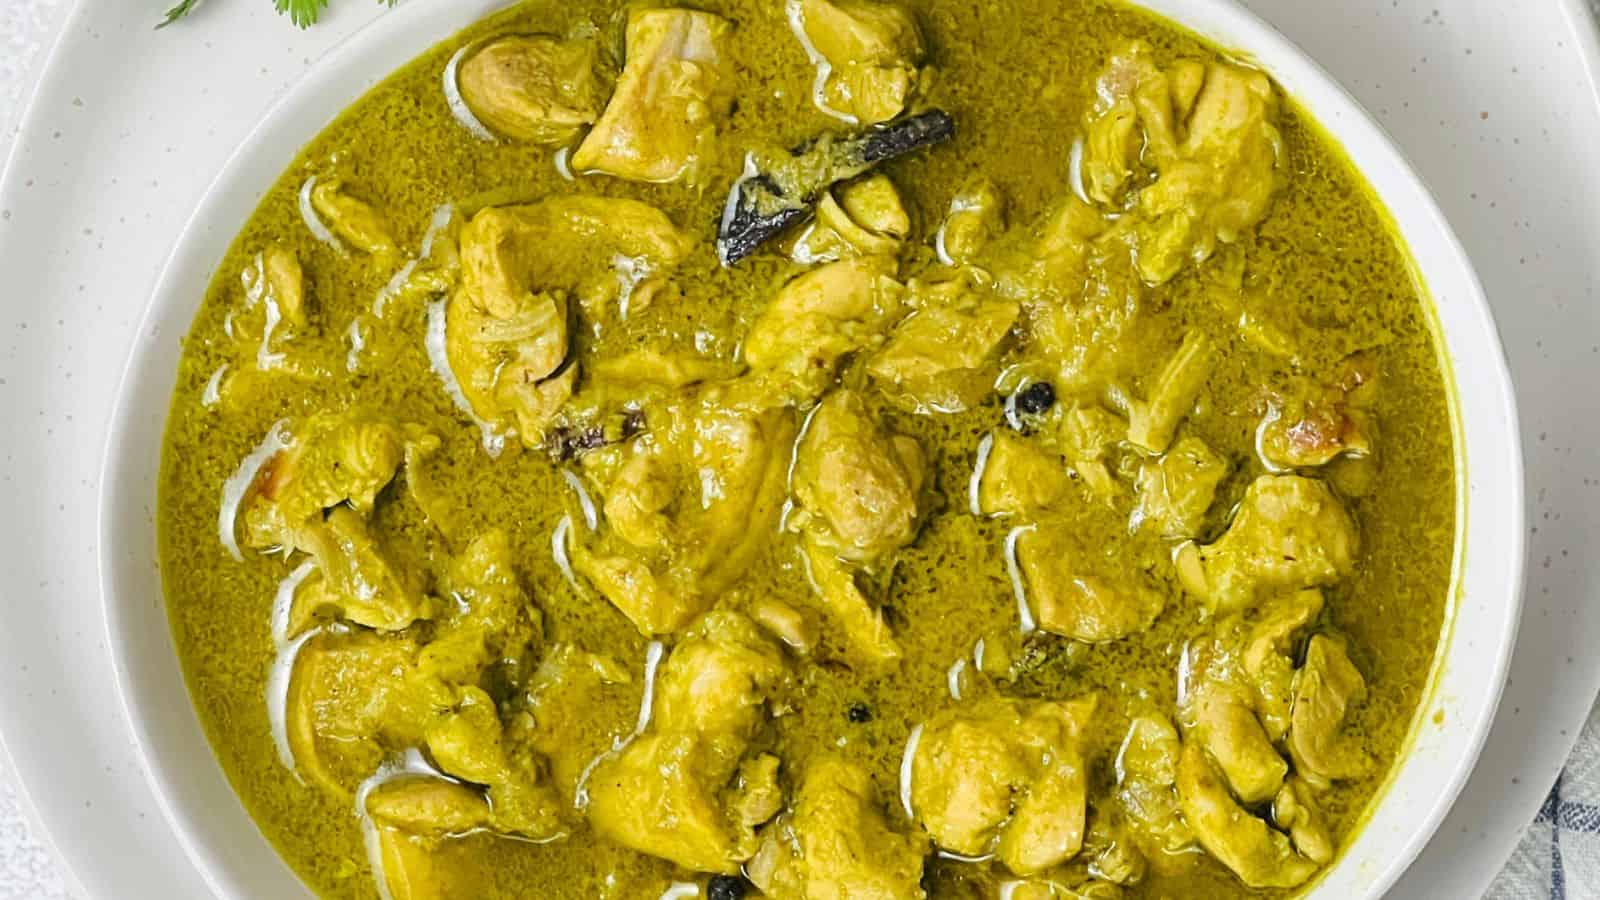 White bowl containing Dhaniya Chicken with a creamy, green sauce and garnished with herbs.